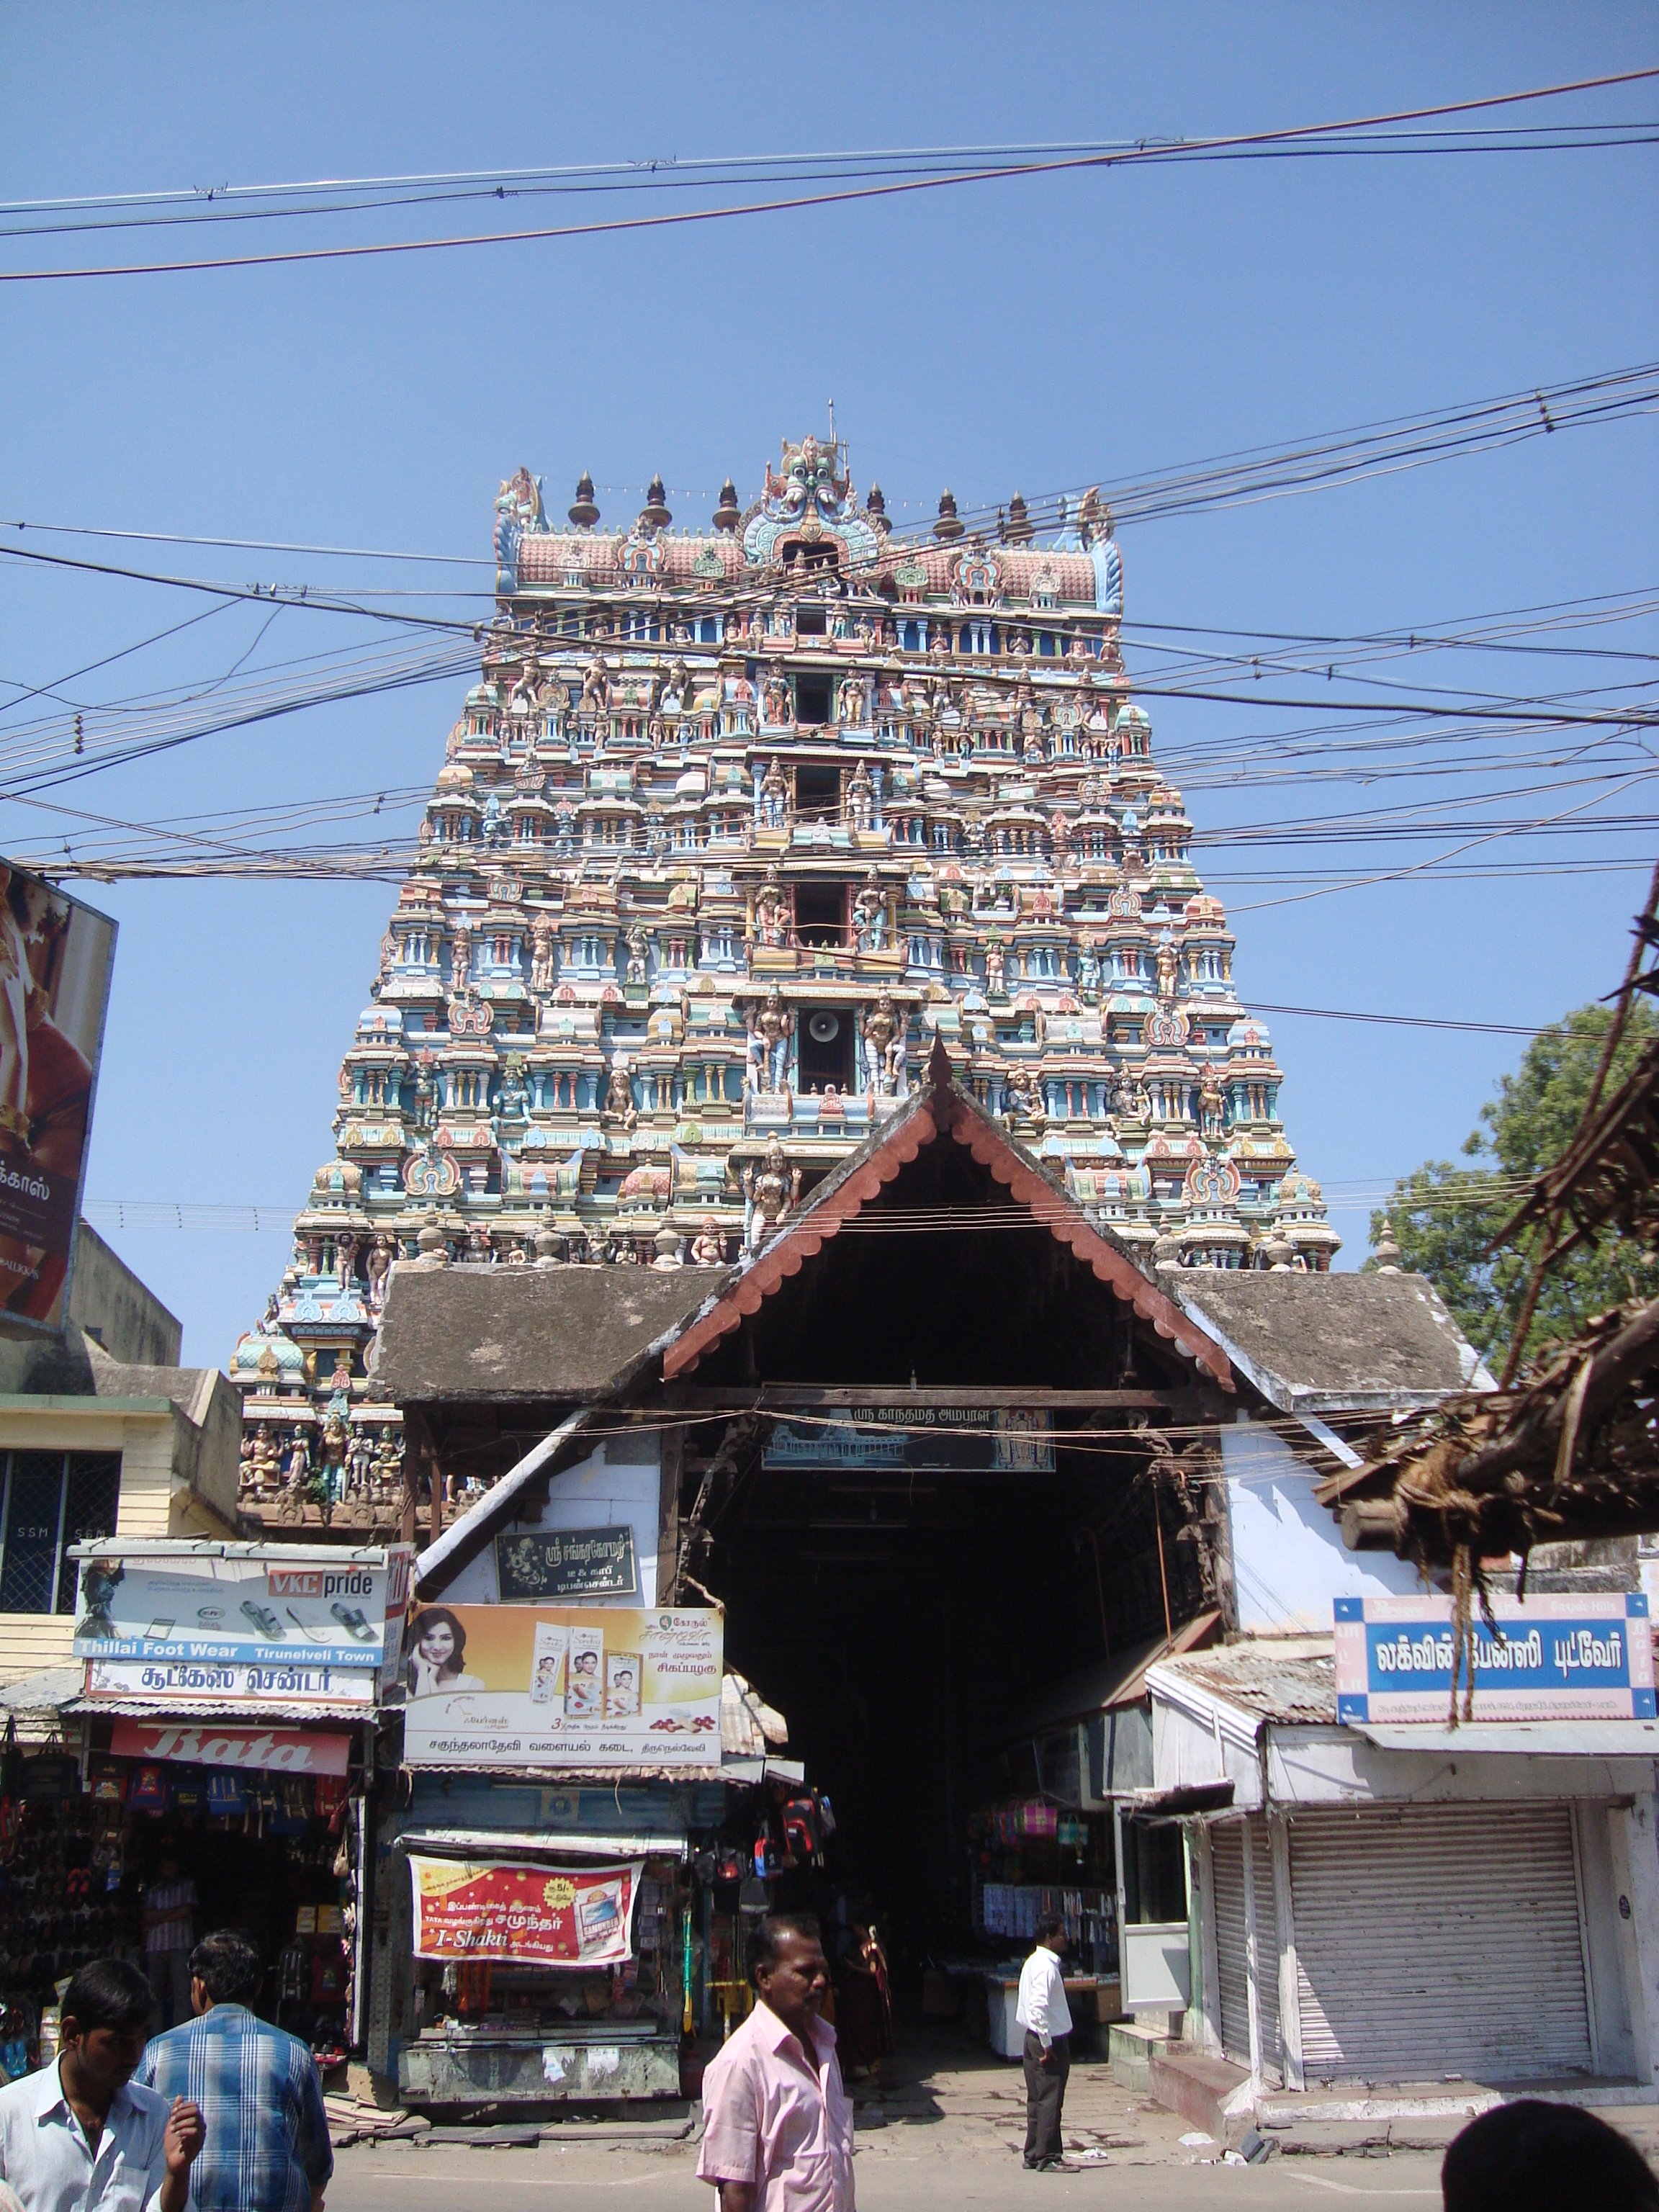 Google map showed wrong route Lorry stuck at Nellaiappar temple